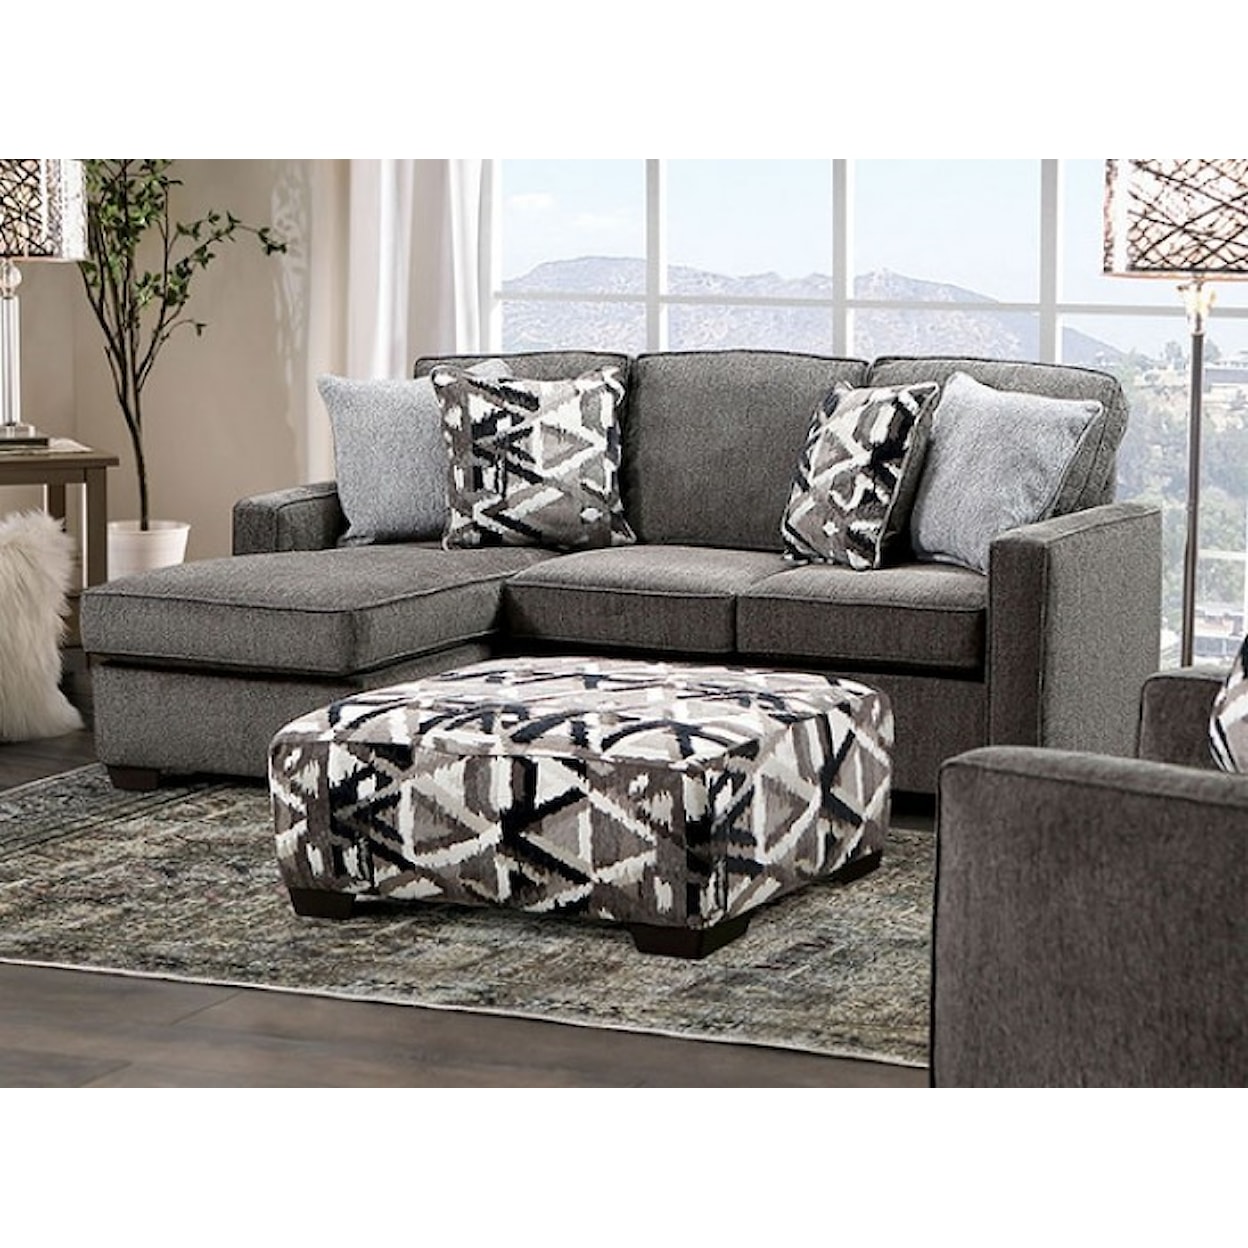 Furniture of America Brentwood Sofa Chaise